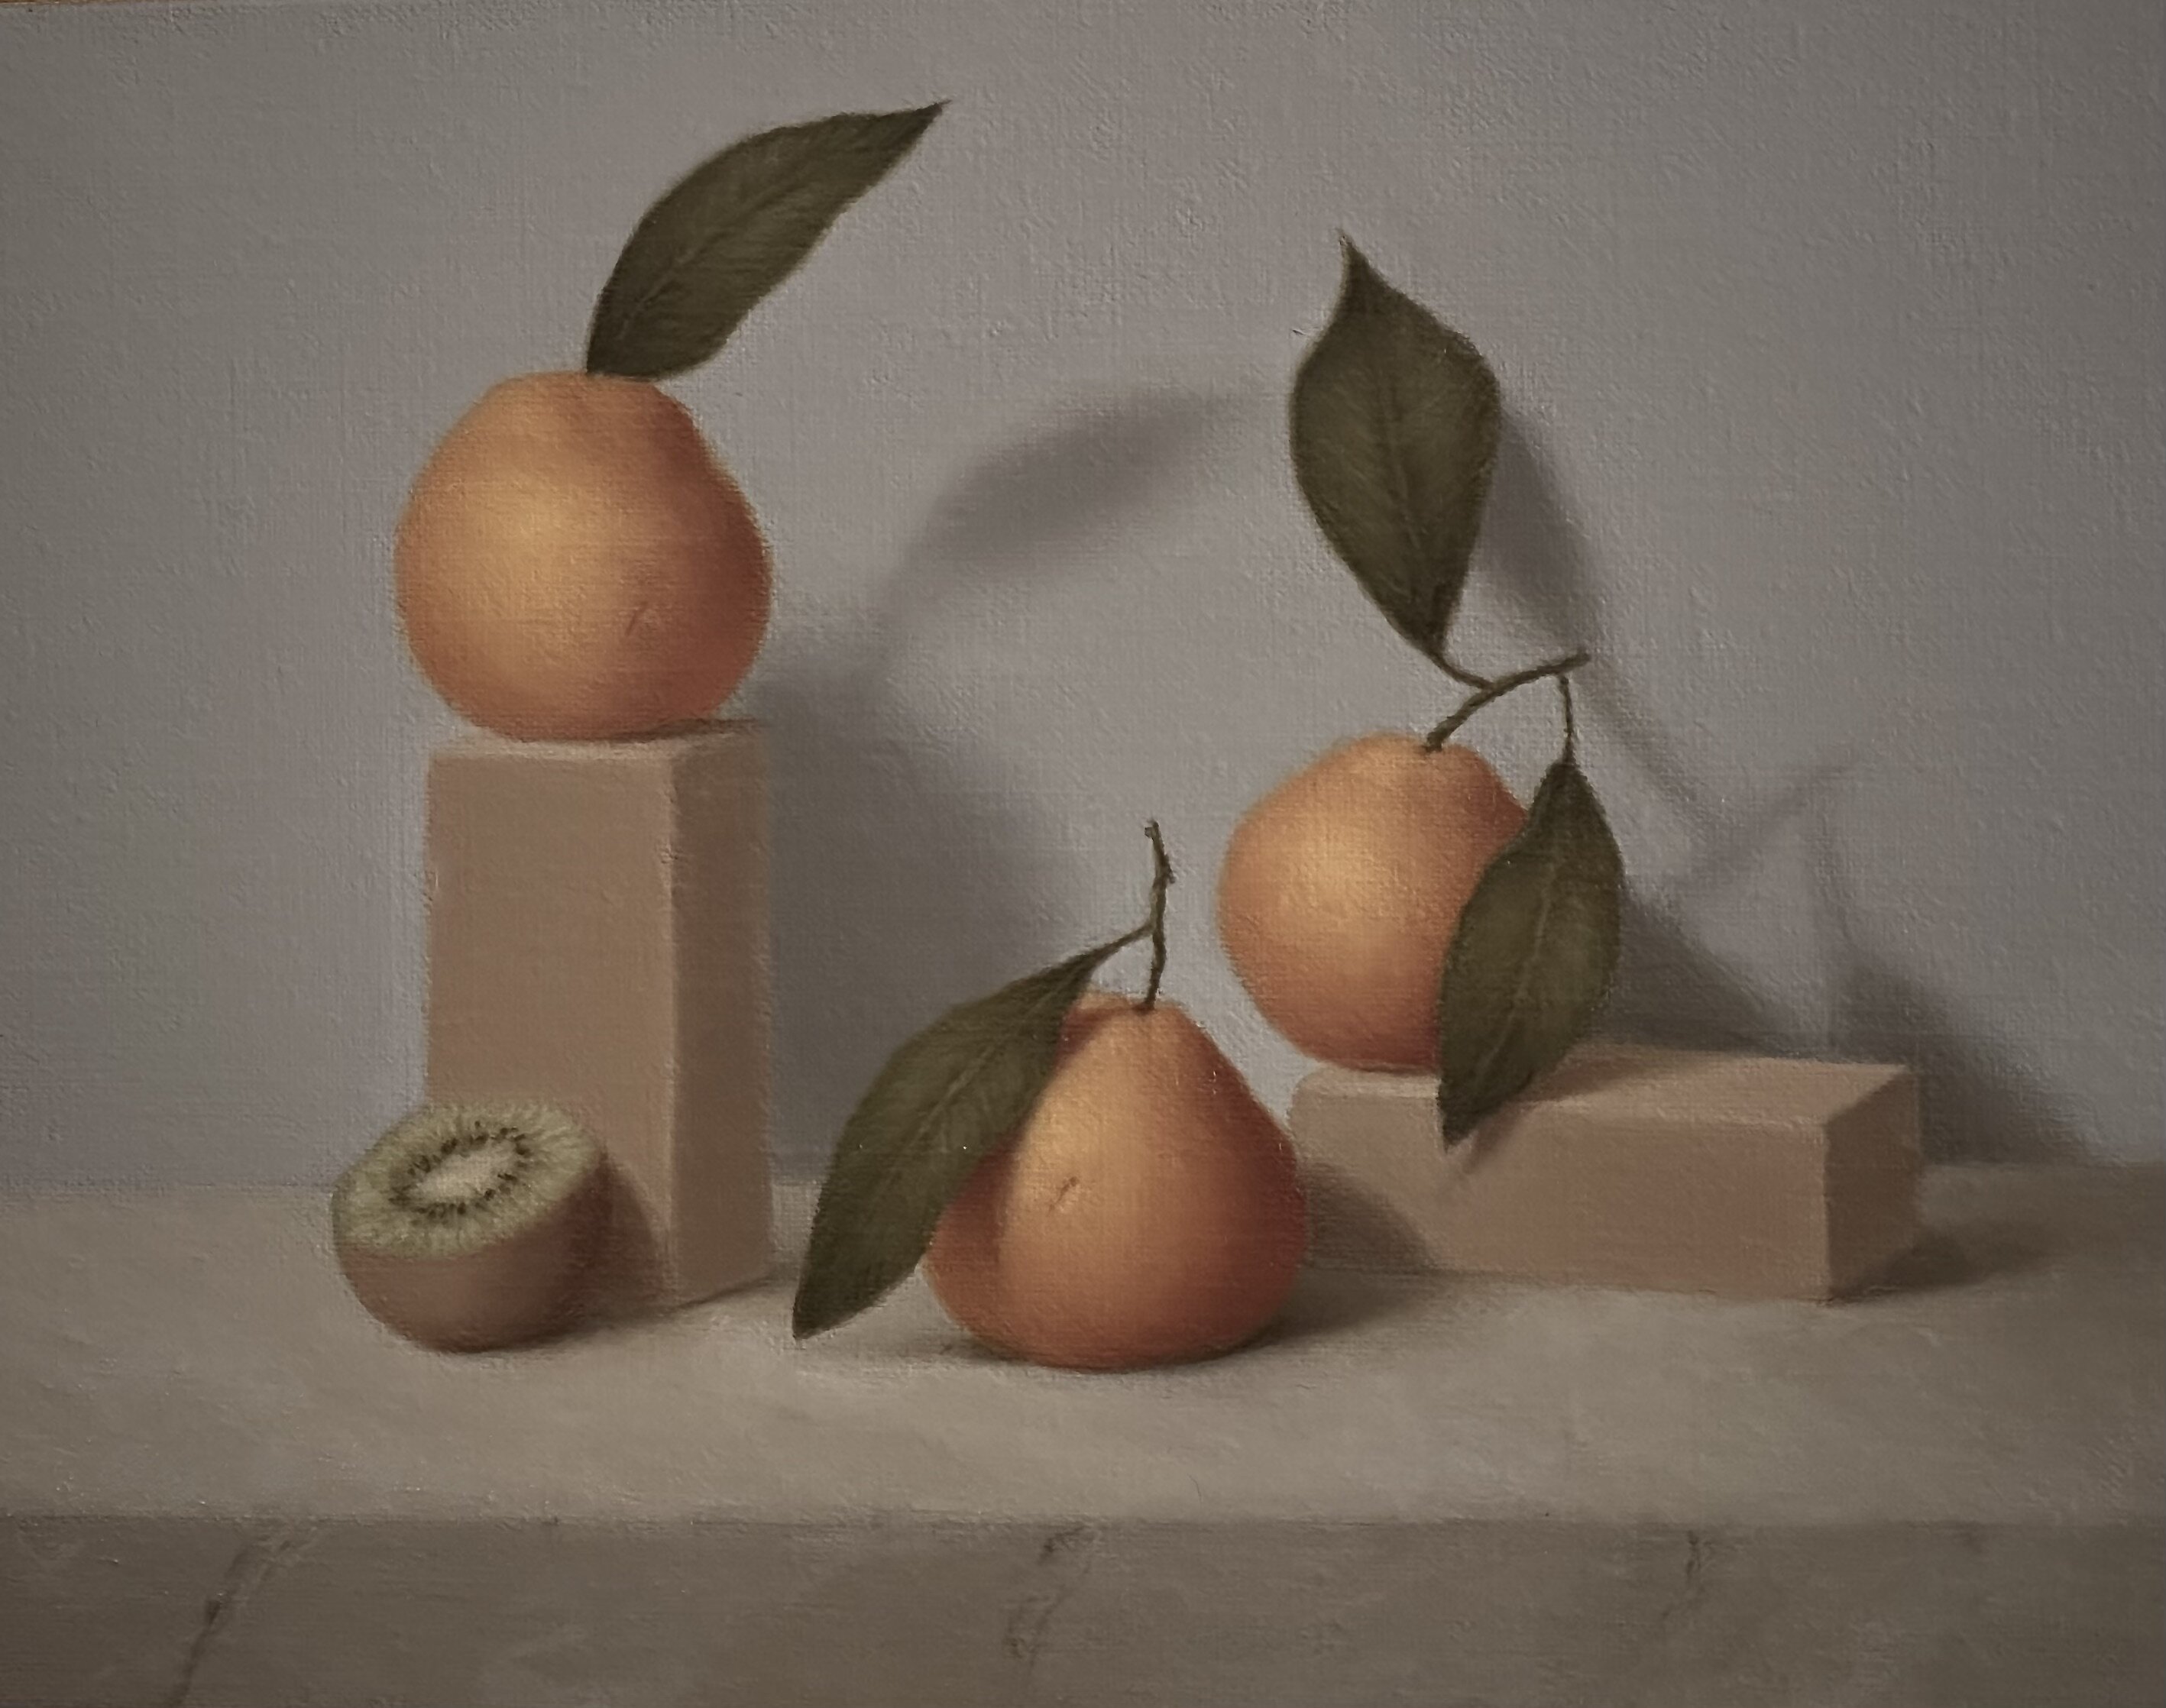 Ronald Weisberg; Persimmon, 2018, Original Painting Oil, 12 x 10 inches. Artwork description: 241 Don t see these fruits that often so I frequently create a painting with them as the subject...